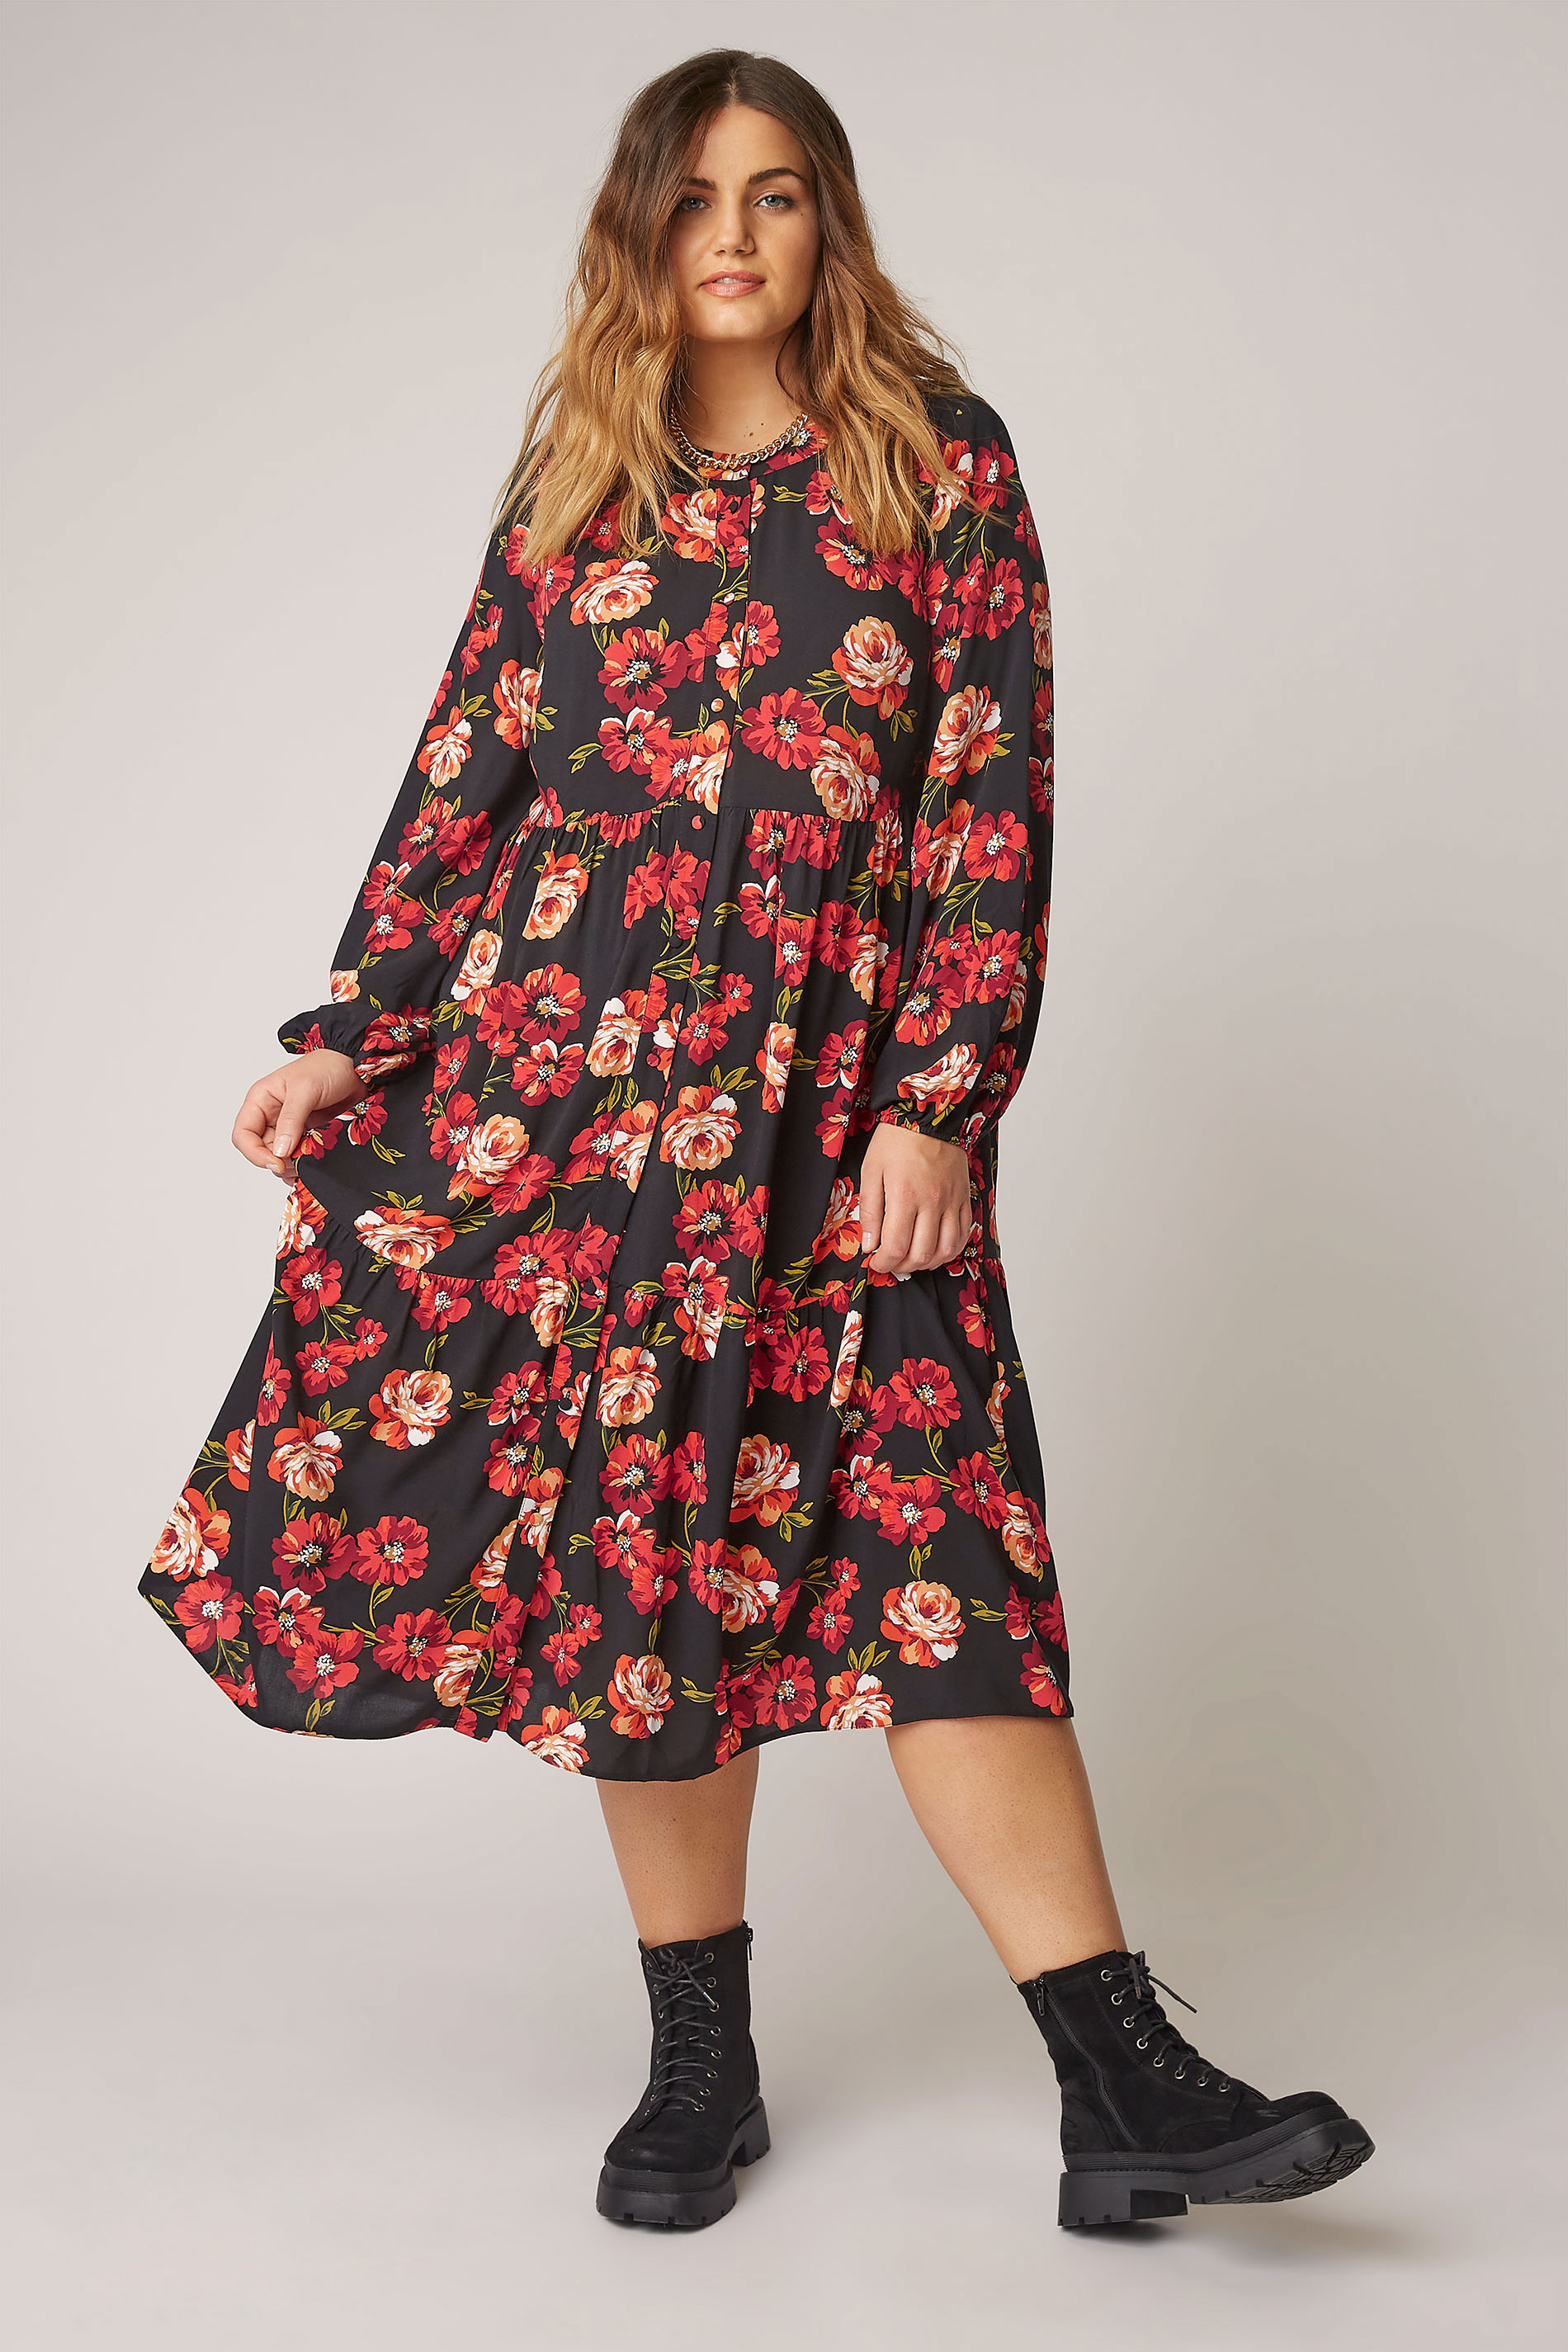 THE LIMITED EDIT Black Floral Smock Tiered Shirt Dress_A.jpg